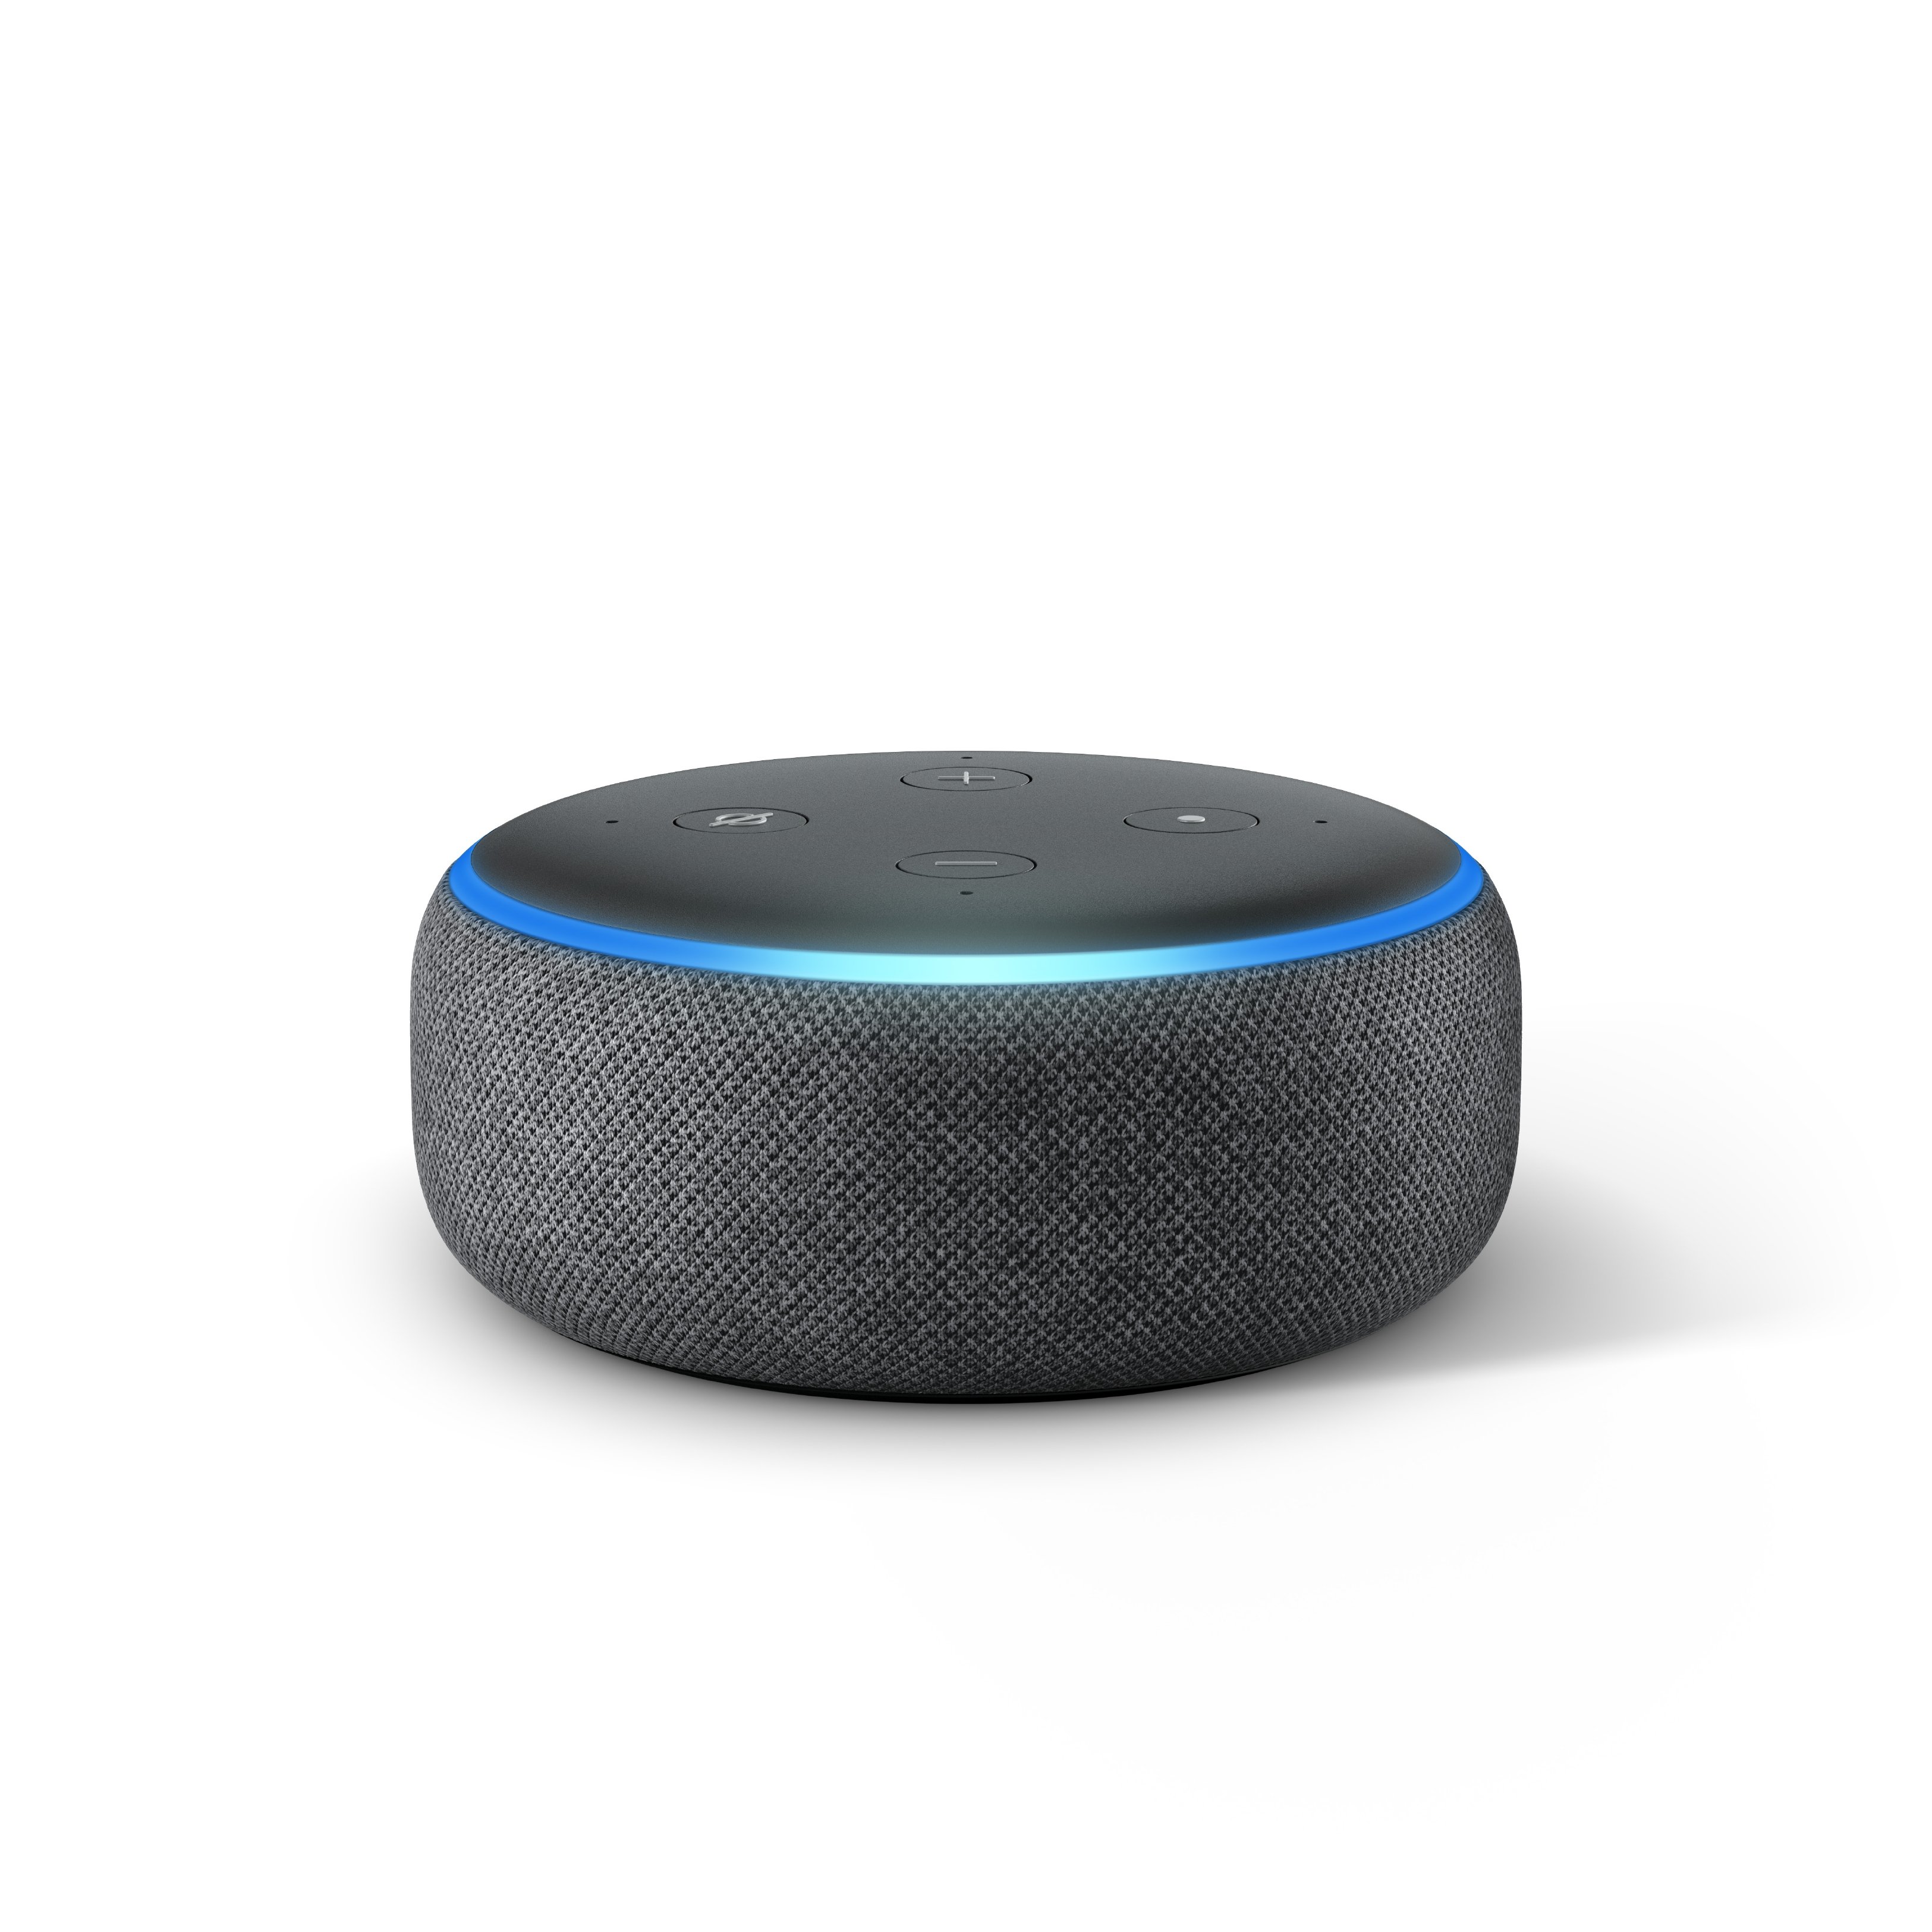 An Echo Dot seen from the front